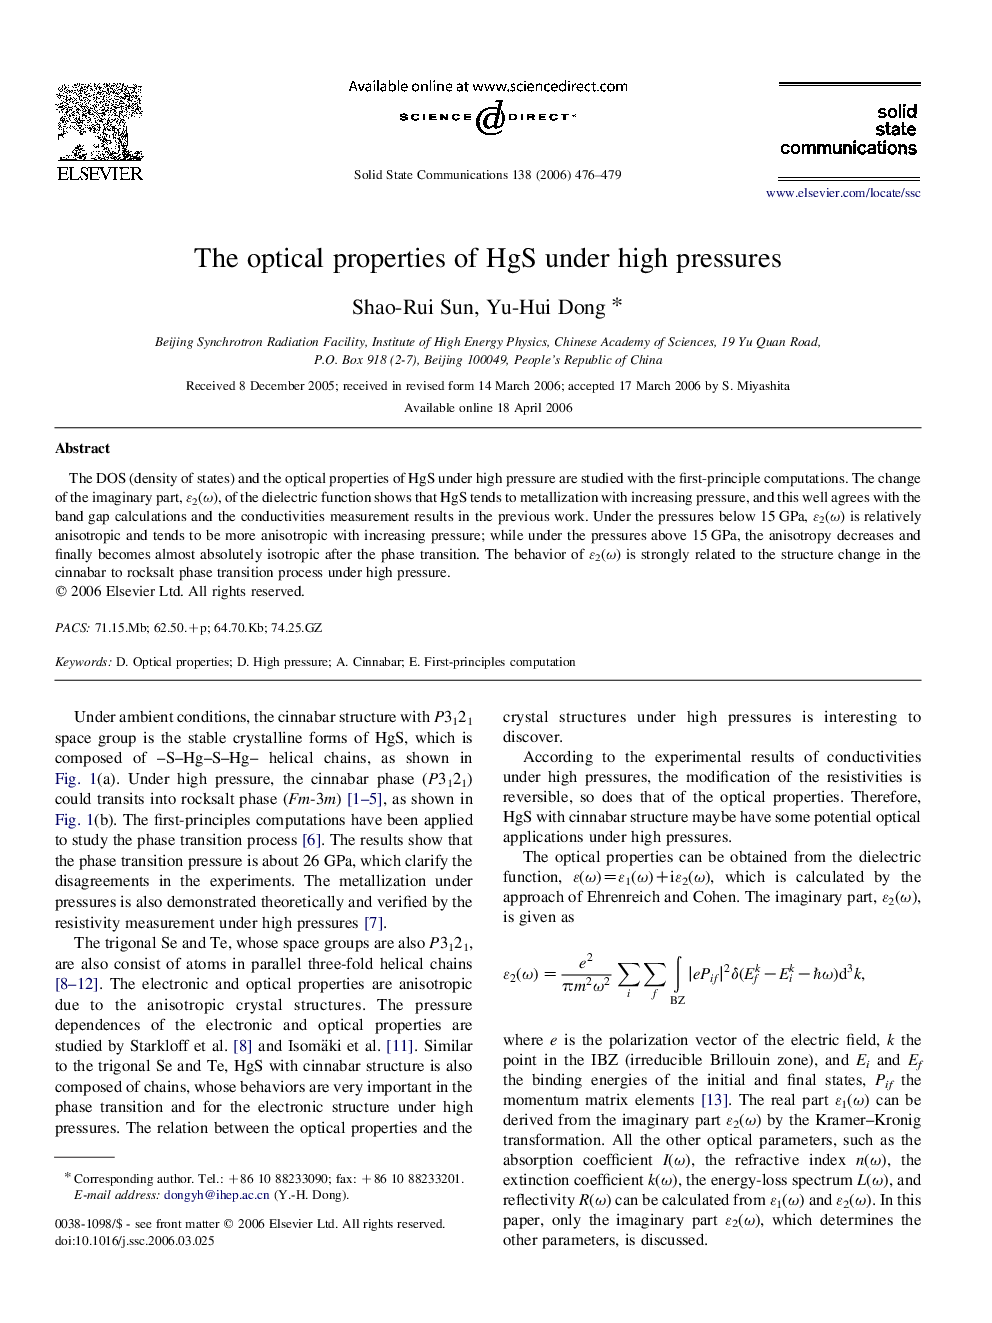 The optical properties of HgS under high pressures